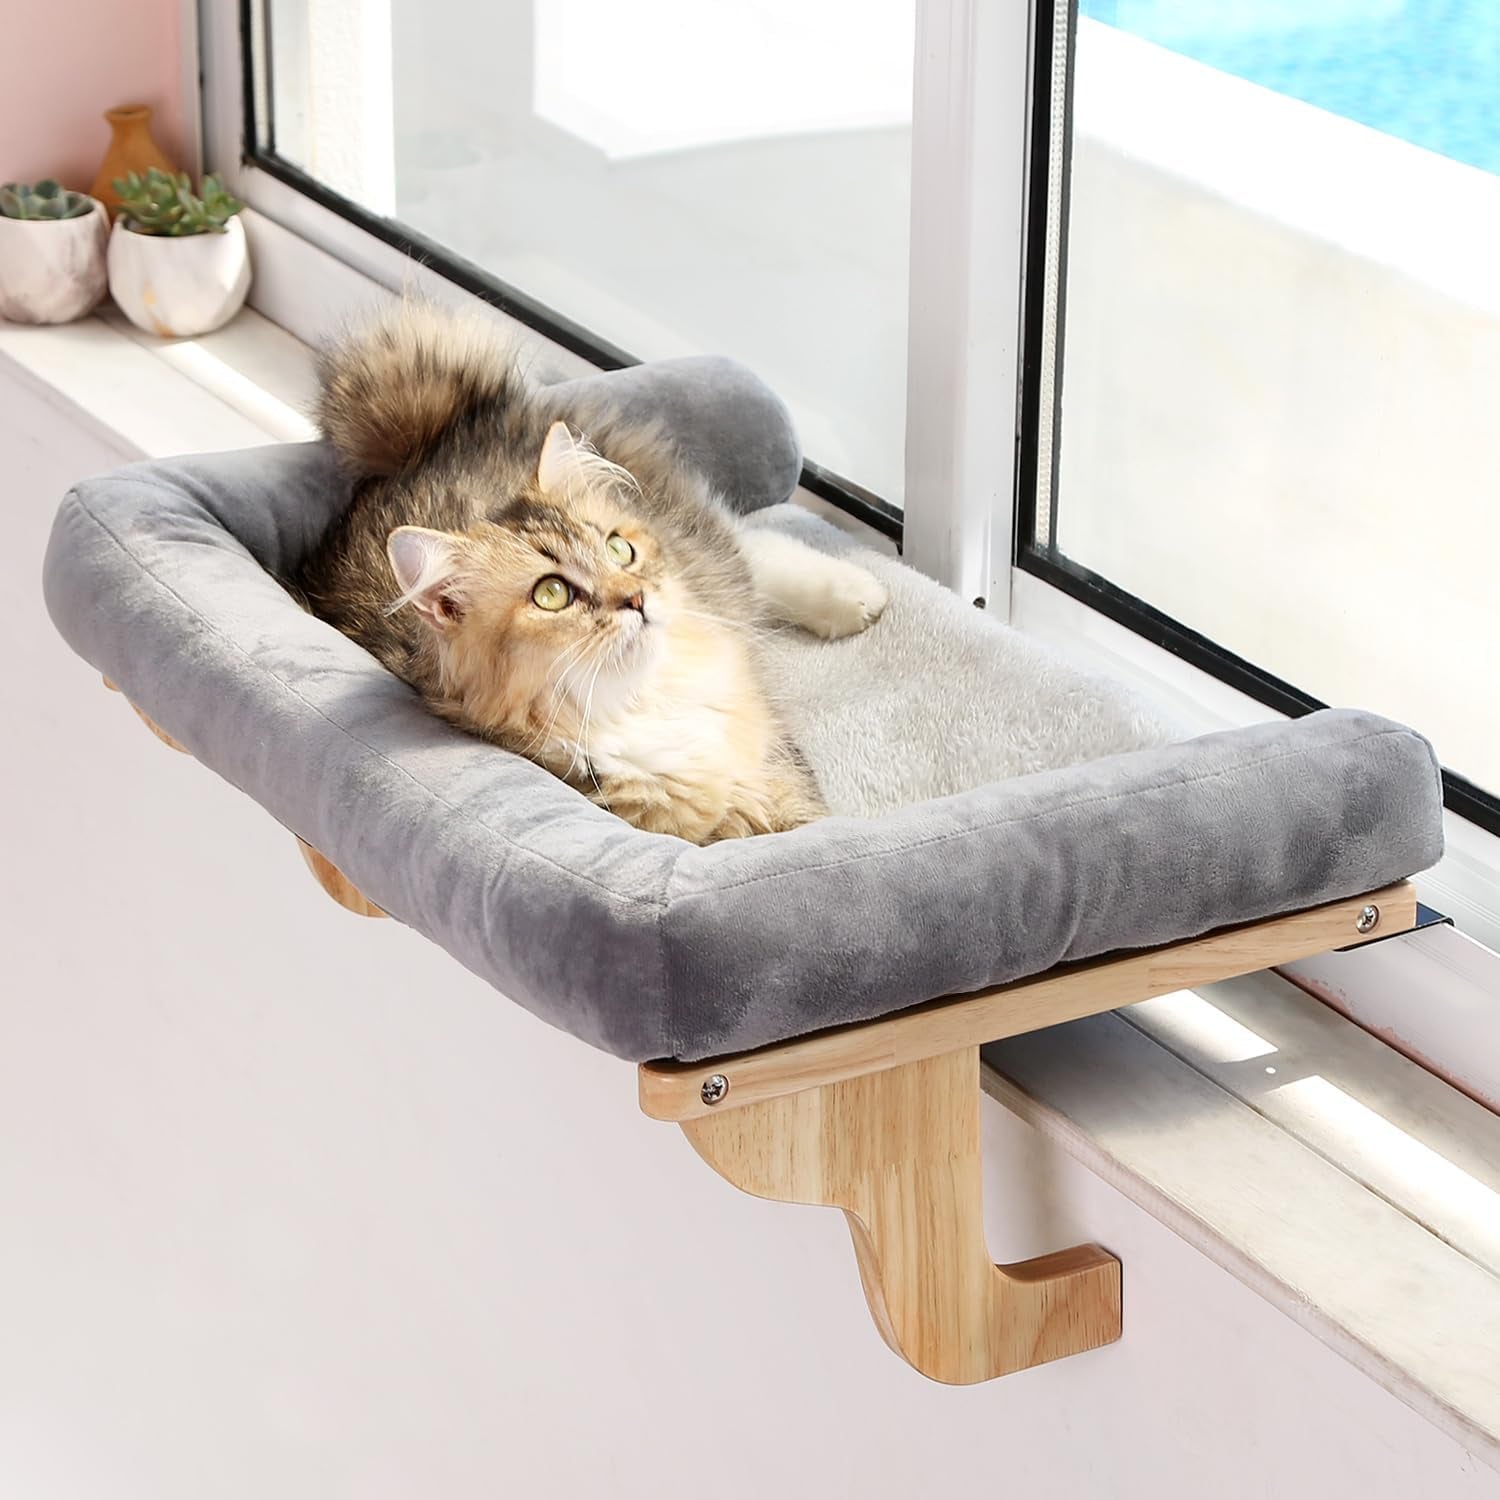 Cat Perch for Window Sill with Bolster - Orthopedic Hammock Design with Premium Hardwood &amp; Robust Metal Frame - Cat Window Seat for Large Cats and Kittens - Nartural Color Wood with Gray Bed